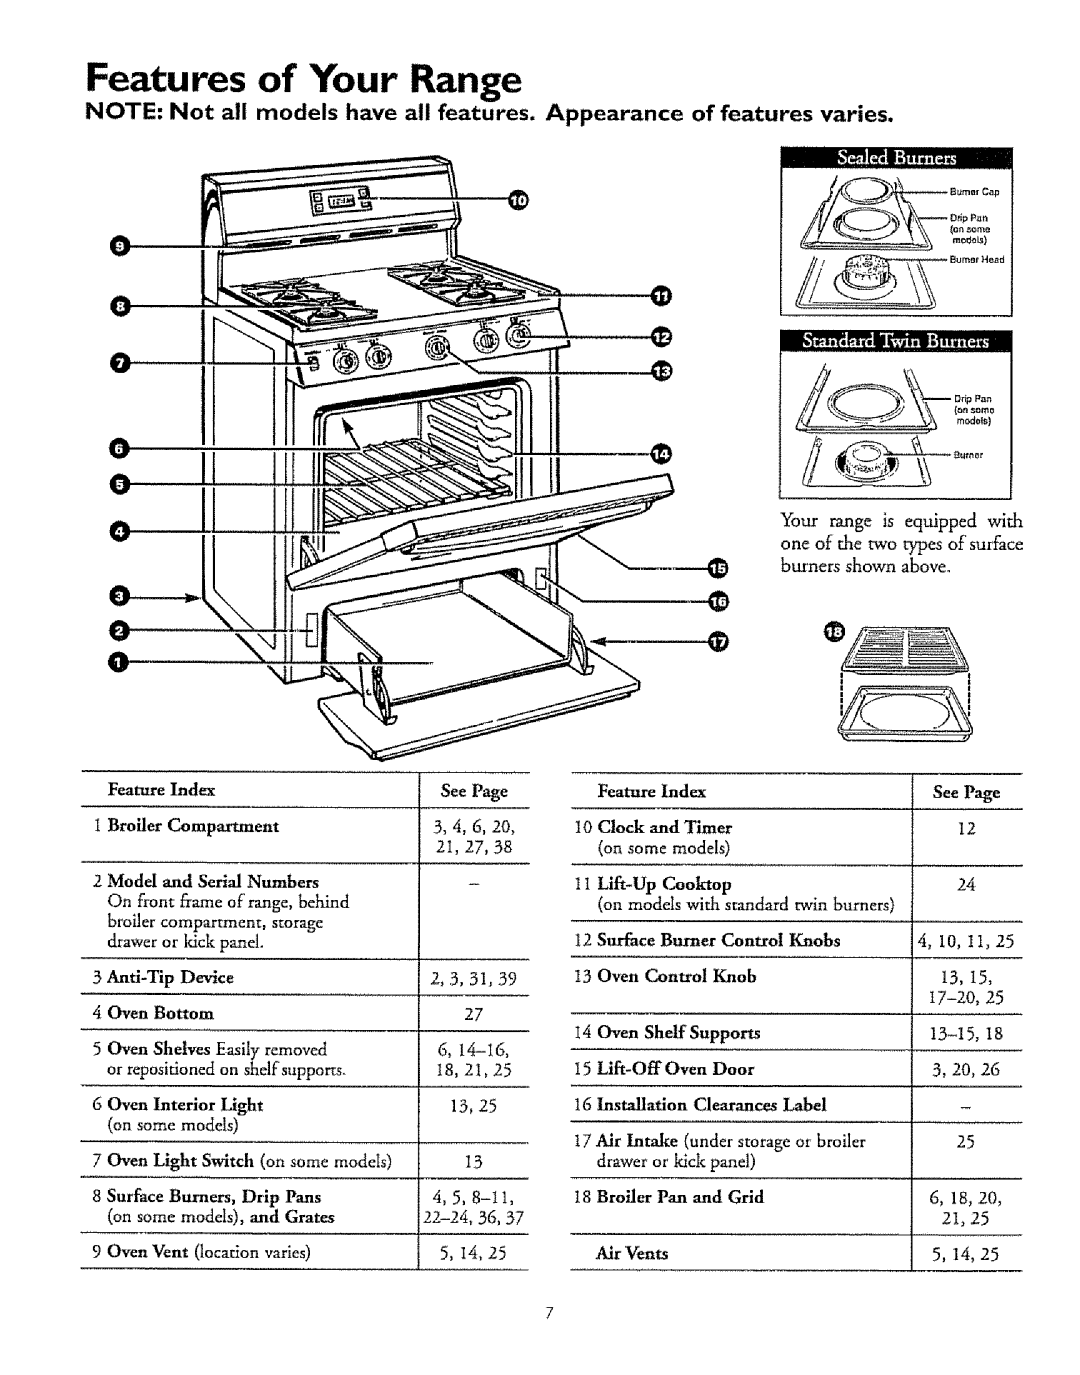 Sears 71661 € lI, Features of Your Range, Index, I Broiler, Model and Serial Numbers, Light, some models, Page, Burner 